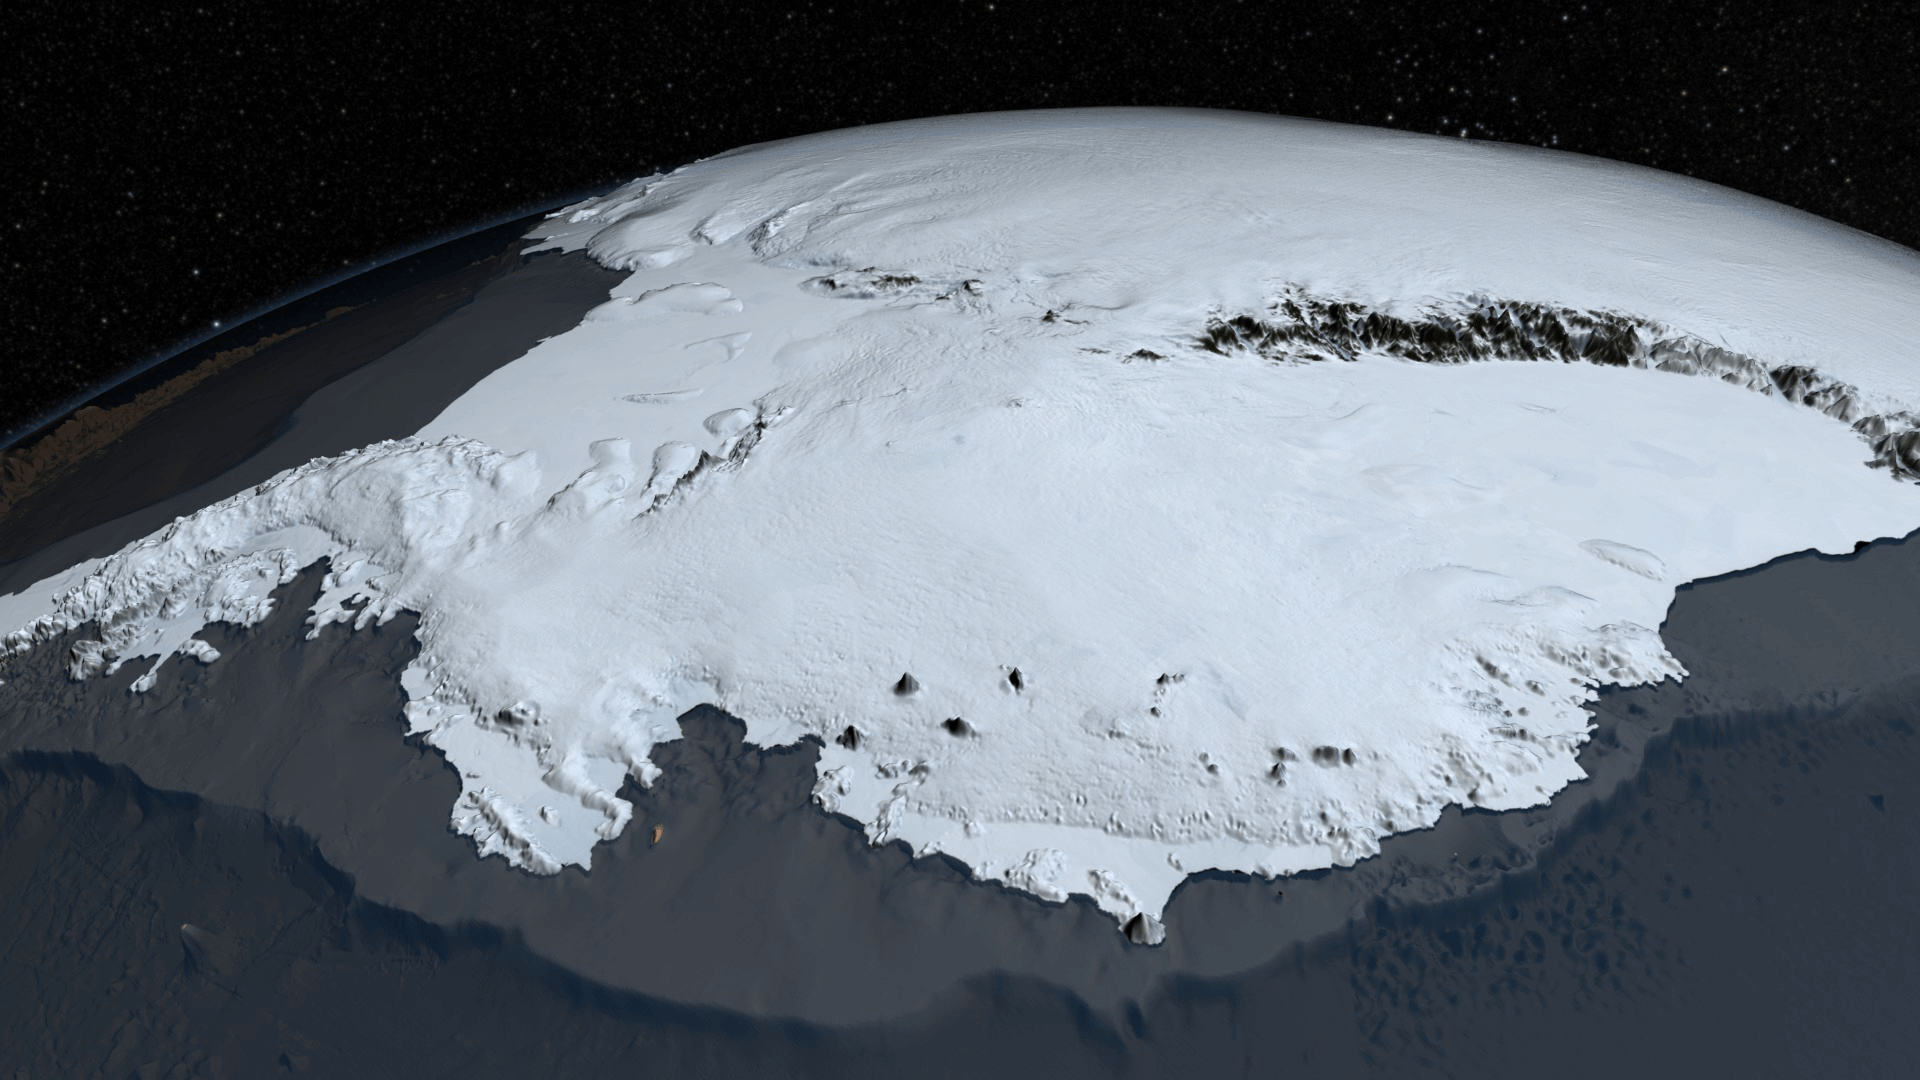 A textured view of part of the Antarctica continent colored white with a gray and black background. The edges of the continent are higher than the gray background, which represents the ocean floor. The continent is curved to follow the curve of Earth, but the visible parts use light gray shadows to show shading of the high mountain edges to make it look 3D.